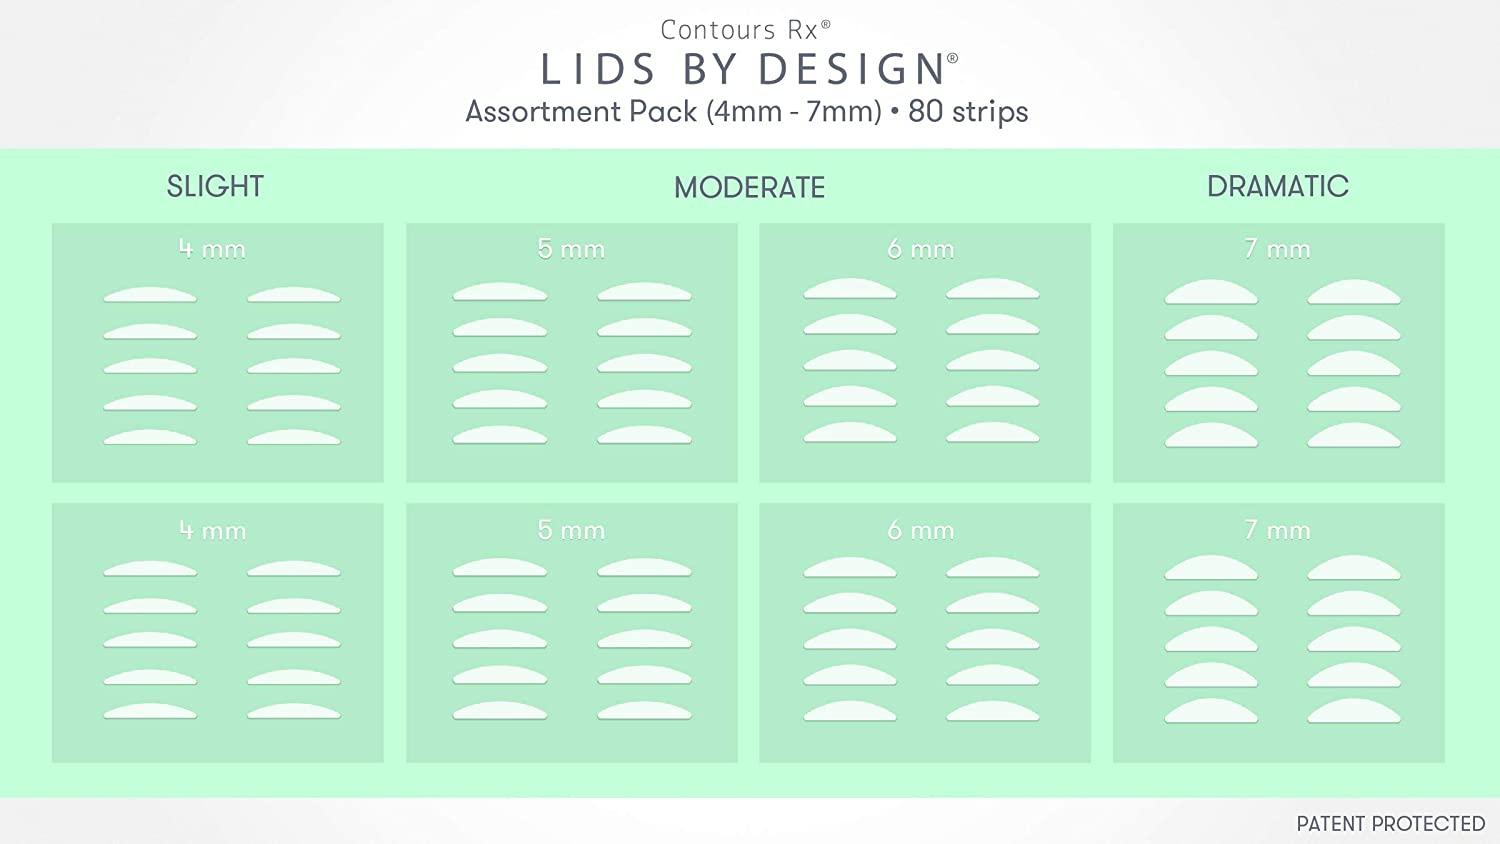 Lids by Design (5mm) Eyelid Correcting Strips for Moderate Lift, 80 Count